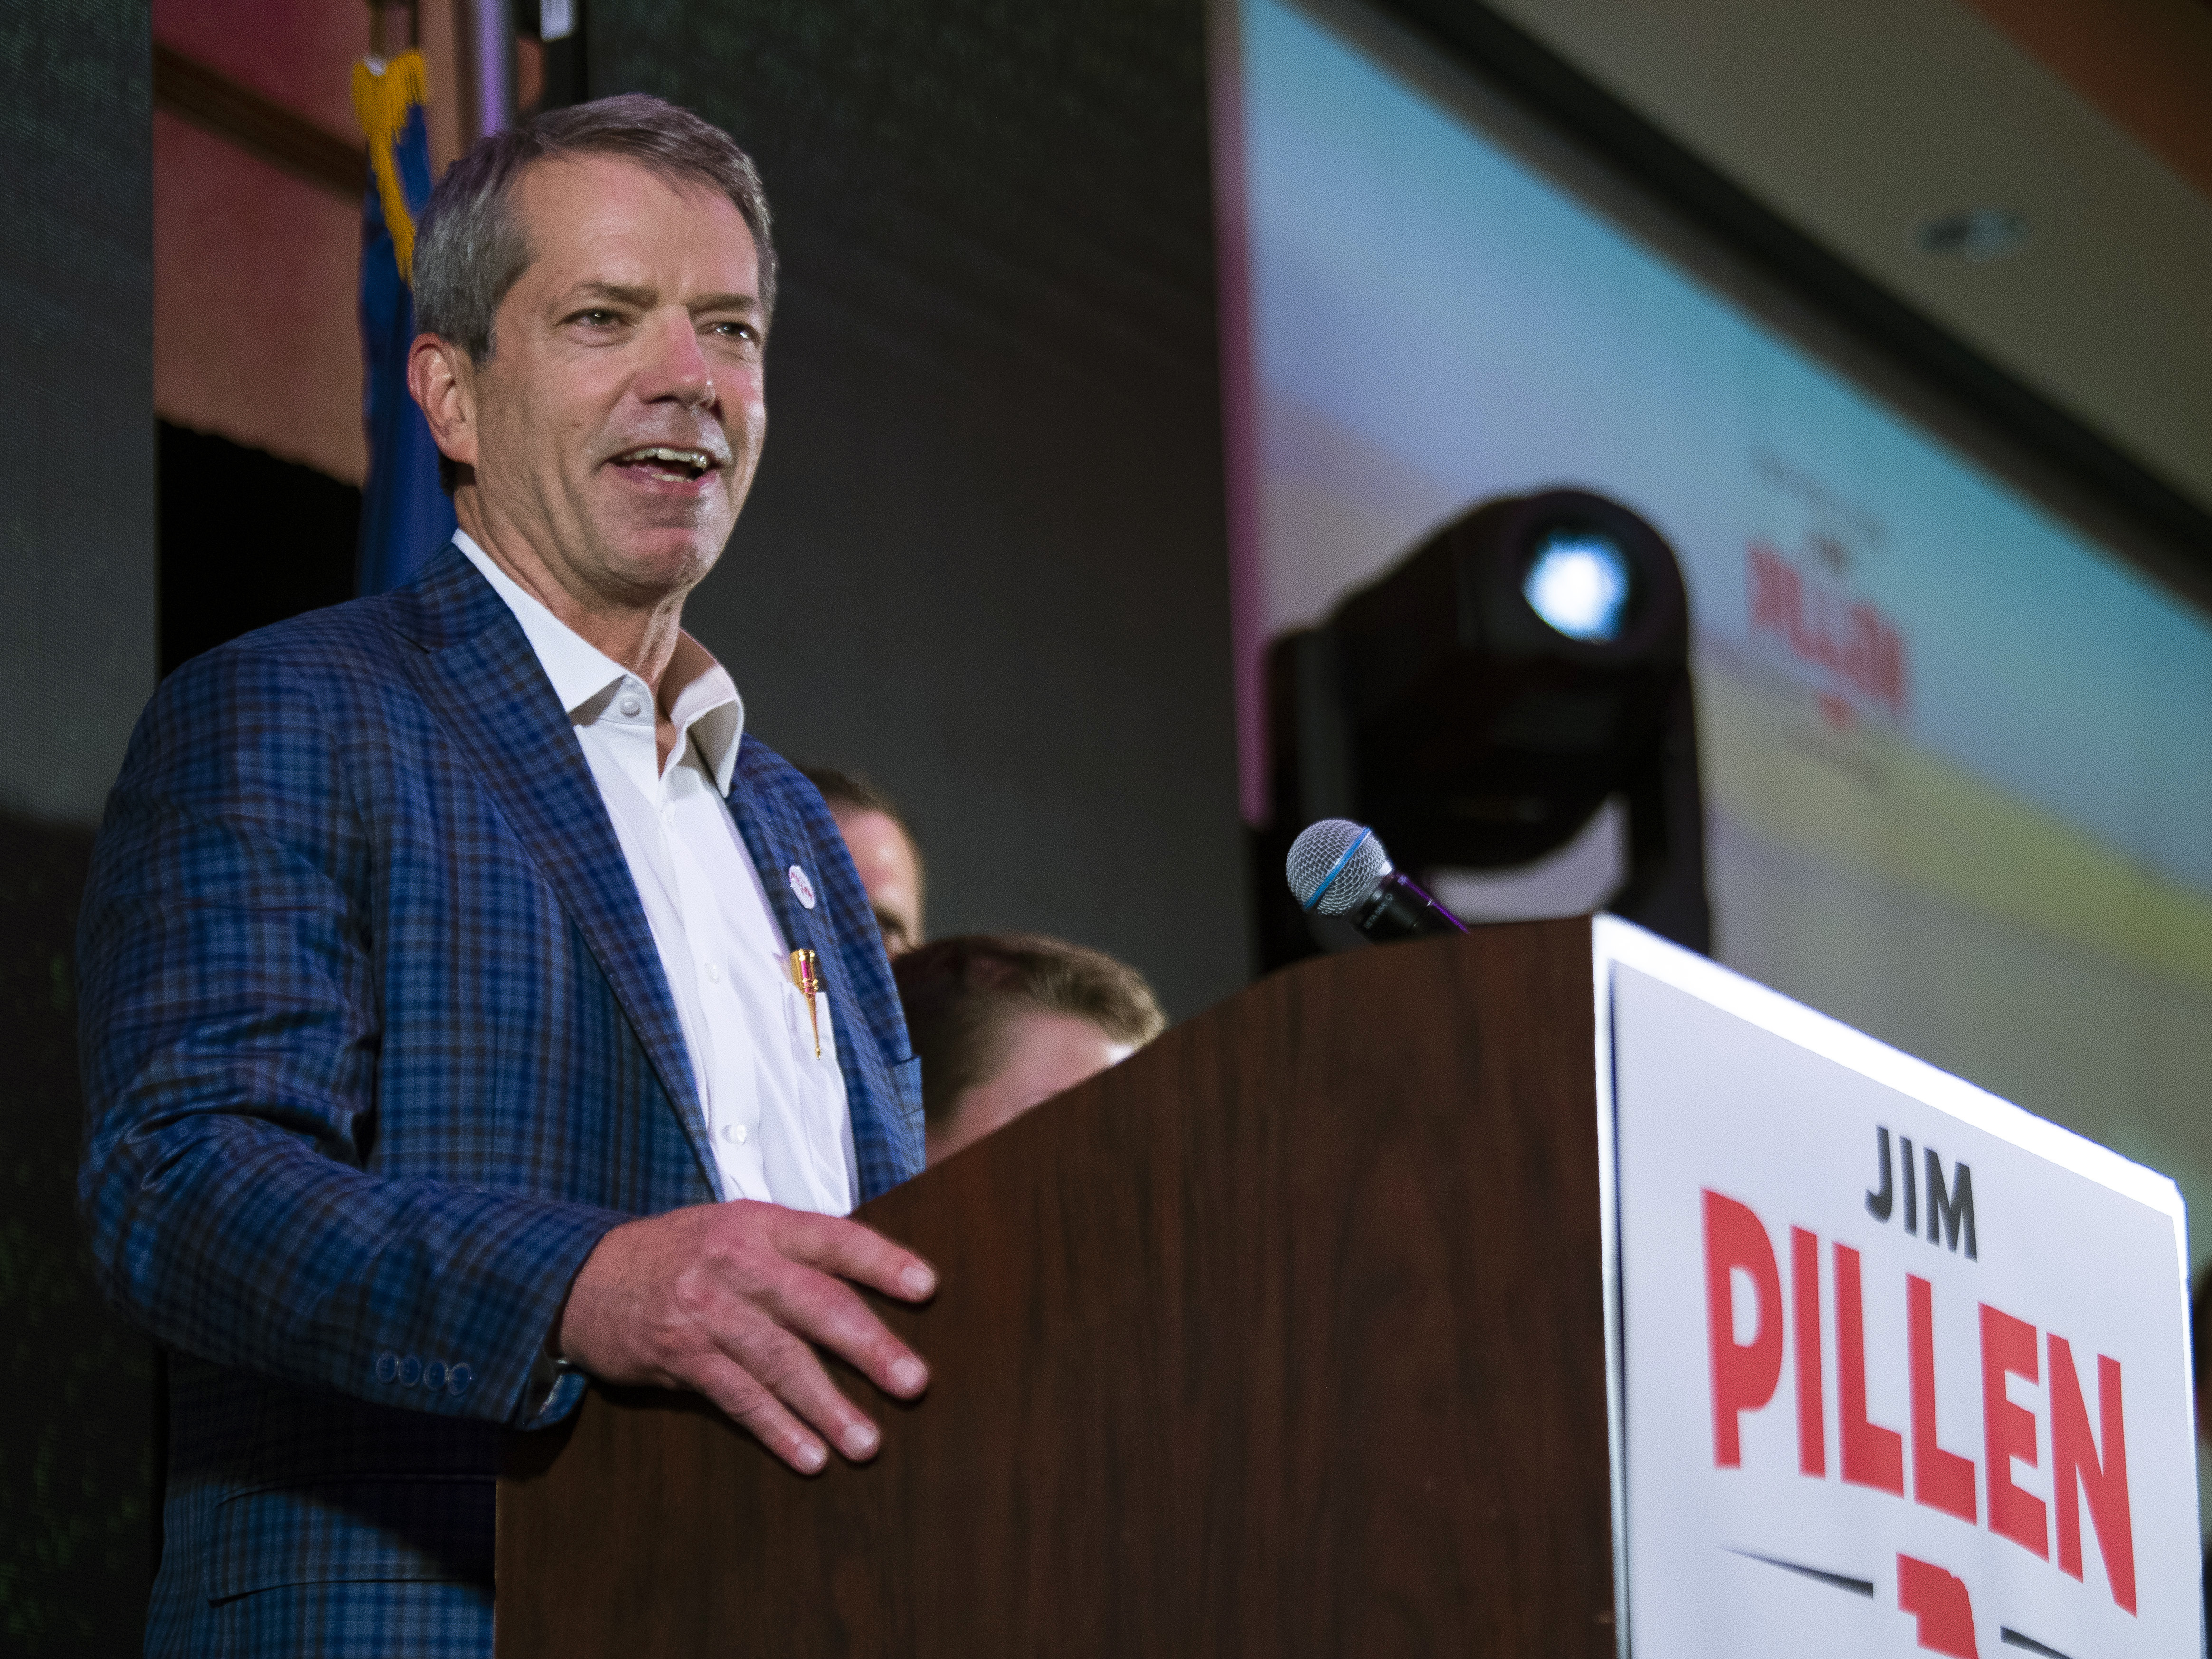 Jim Pillen smiles to applause as he is named the winner of the Nebraska Republican gubernatorial primary during an election night party on May 10, 2022, in Lincoln, Neb.